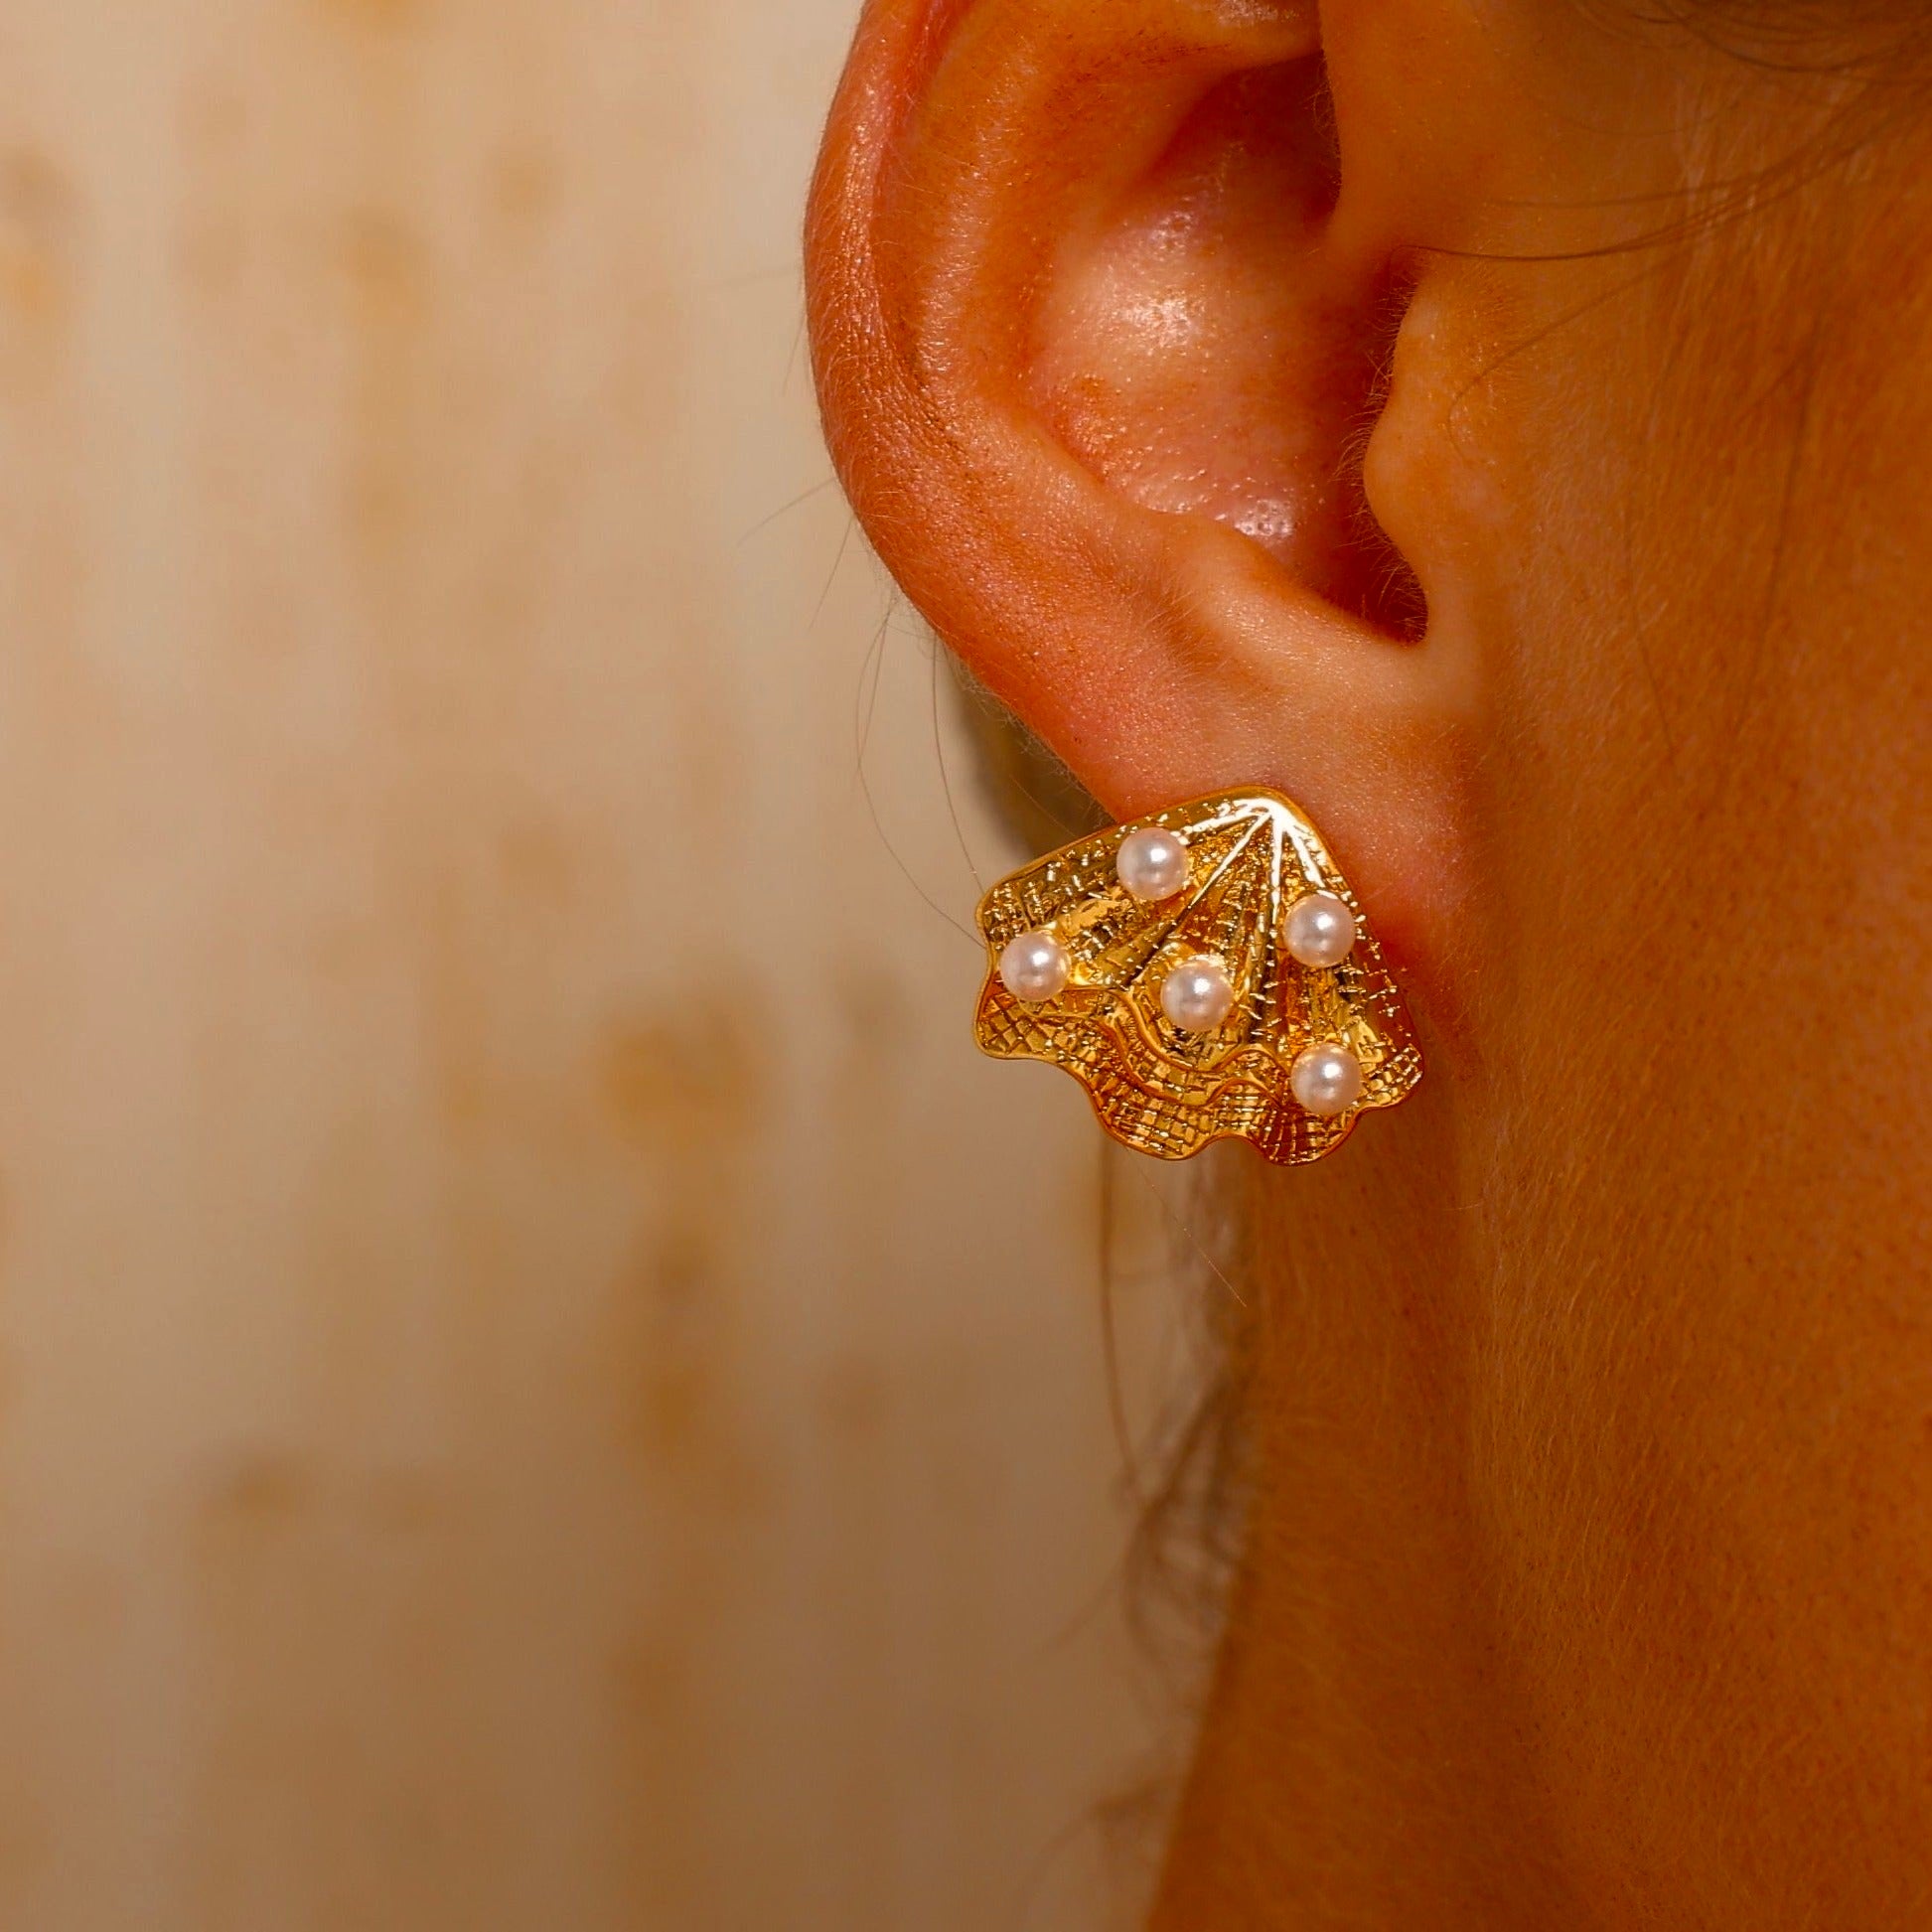 Shell Stud Earrings Inlaid with Pearls - 18K Gold Plated - Earrings - ONNNIII